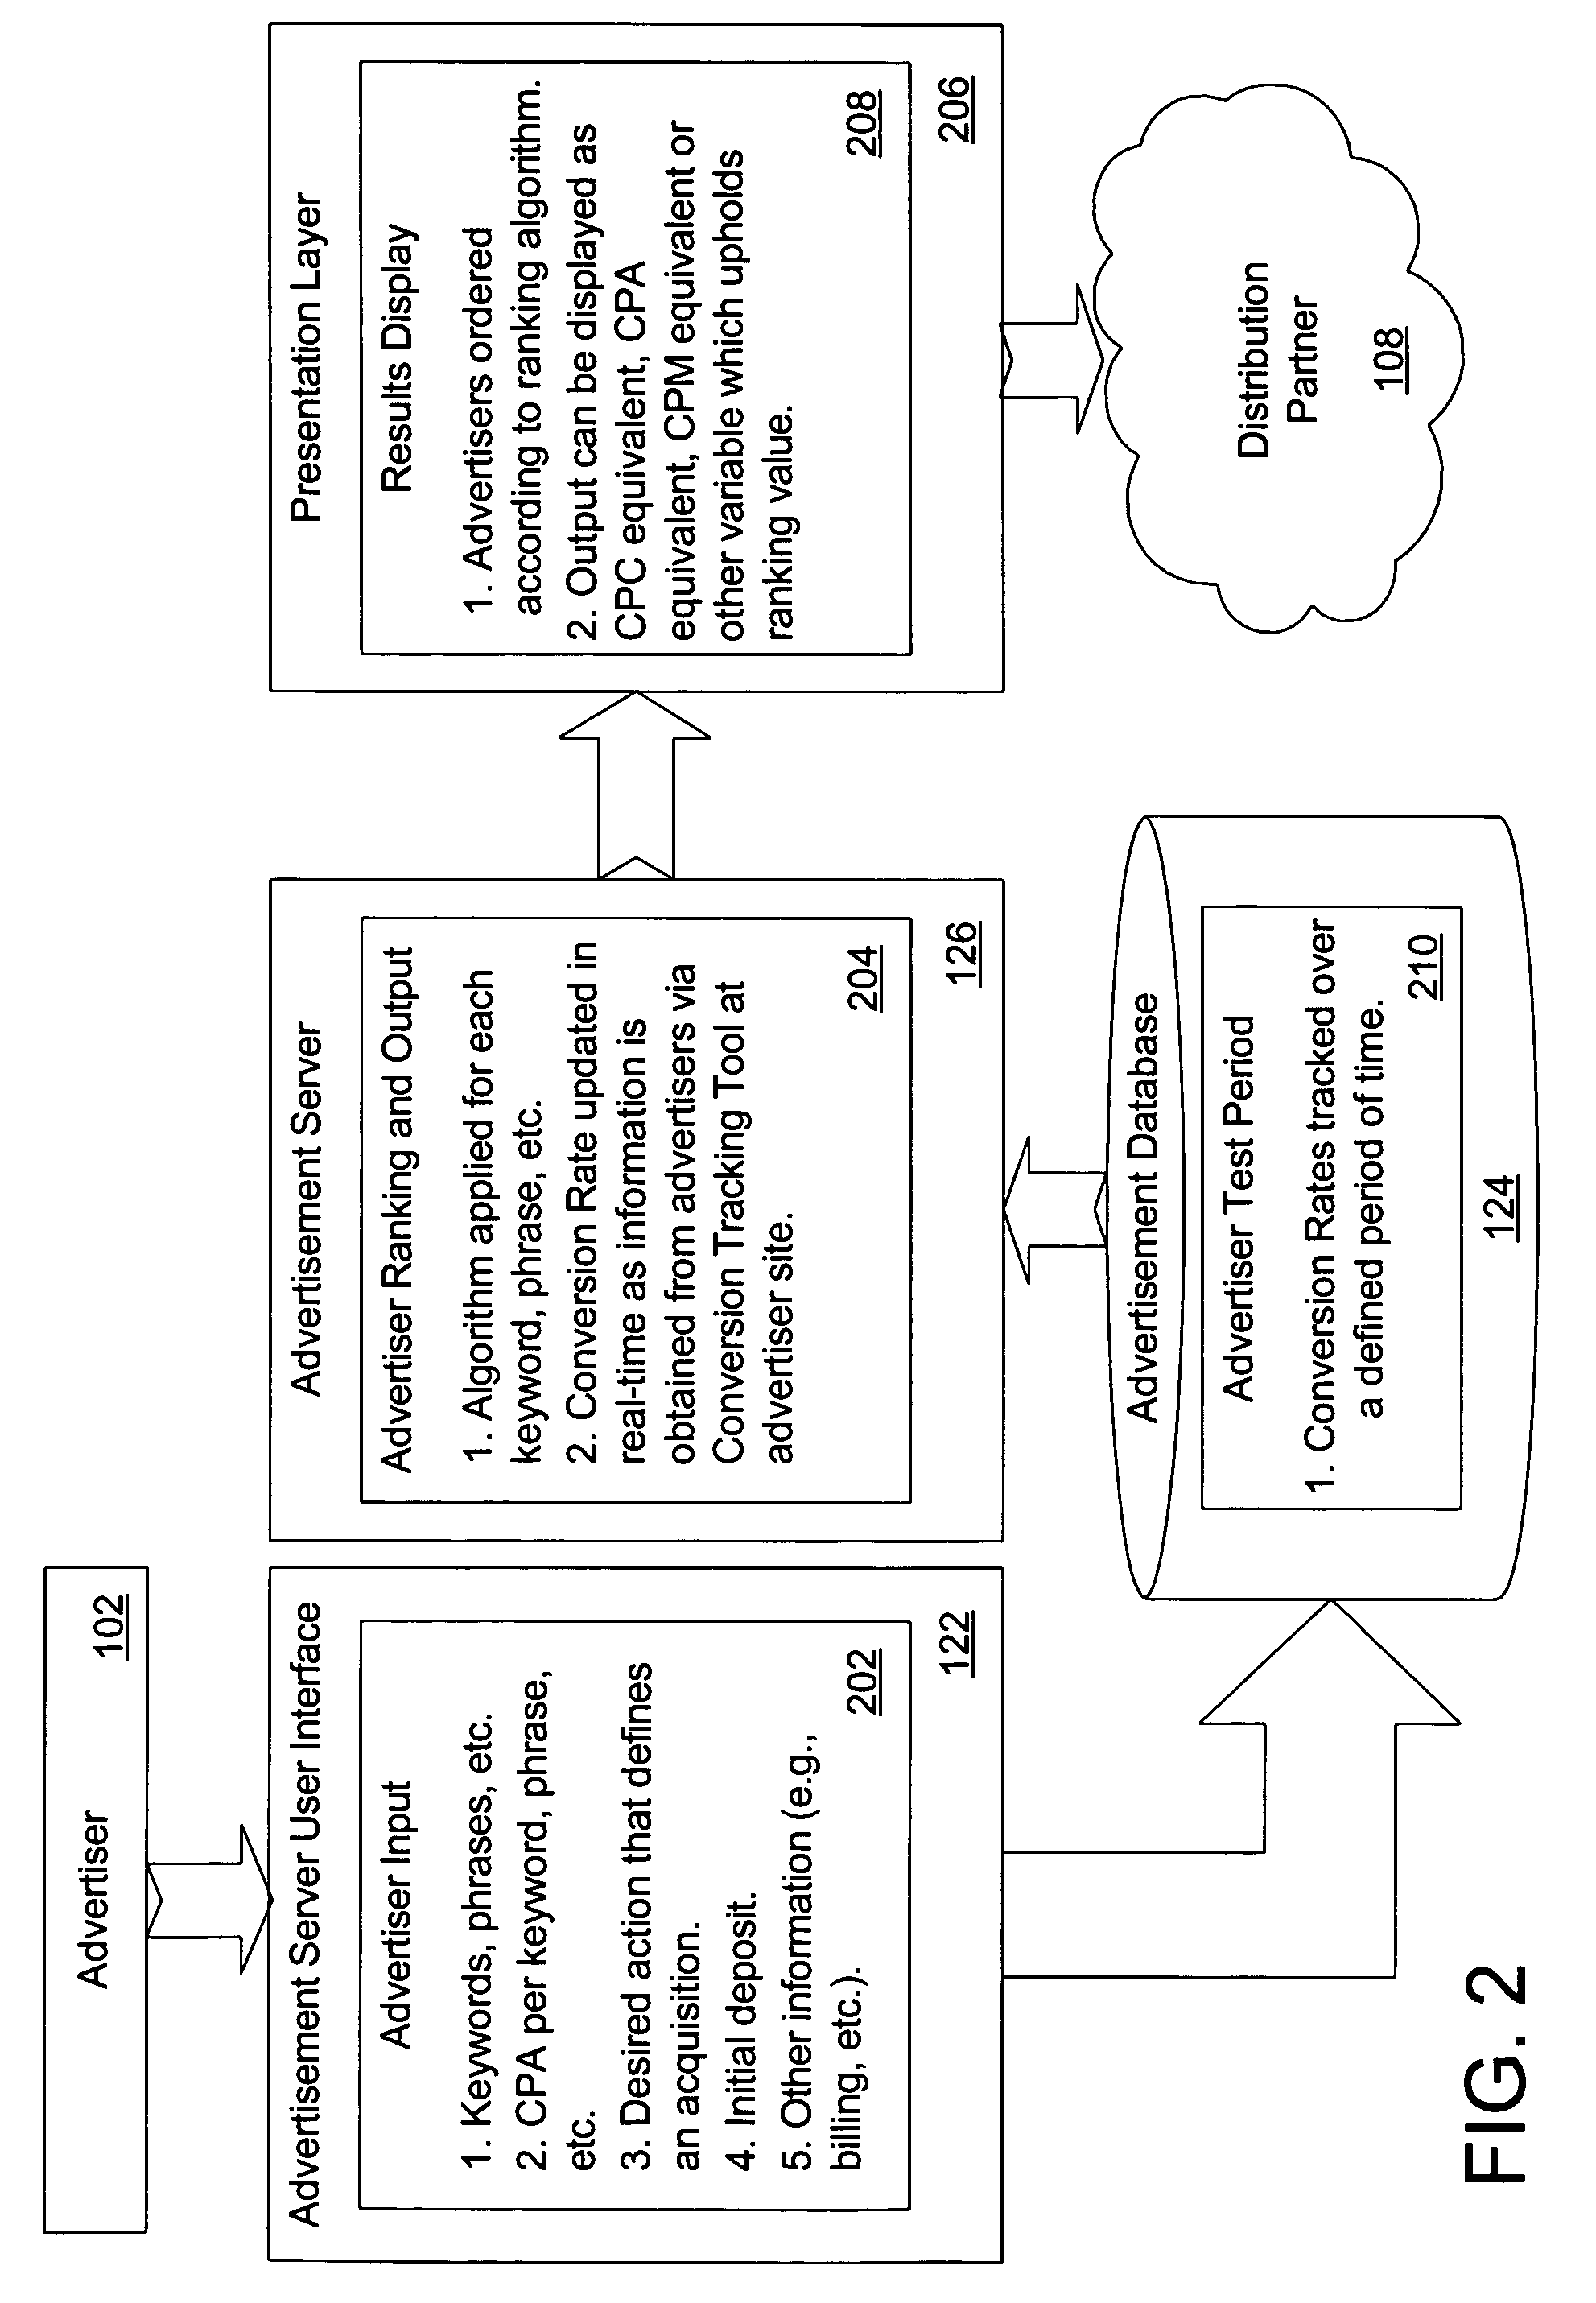 Automatically updating performance-based online advertising system and method